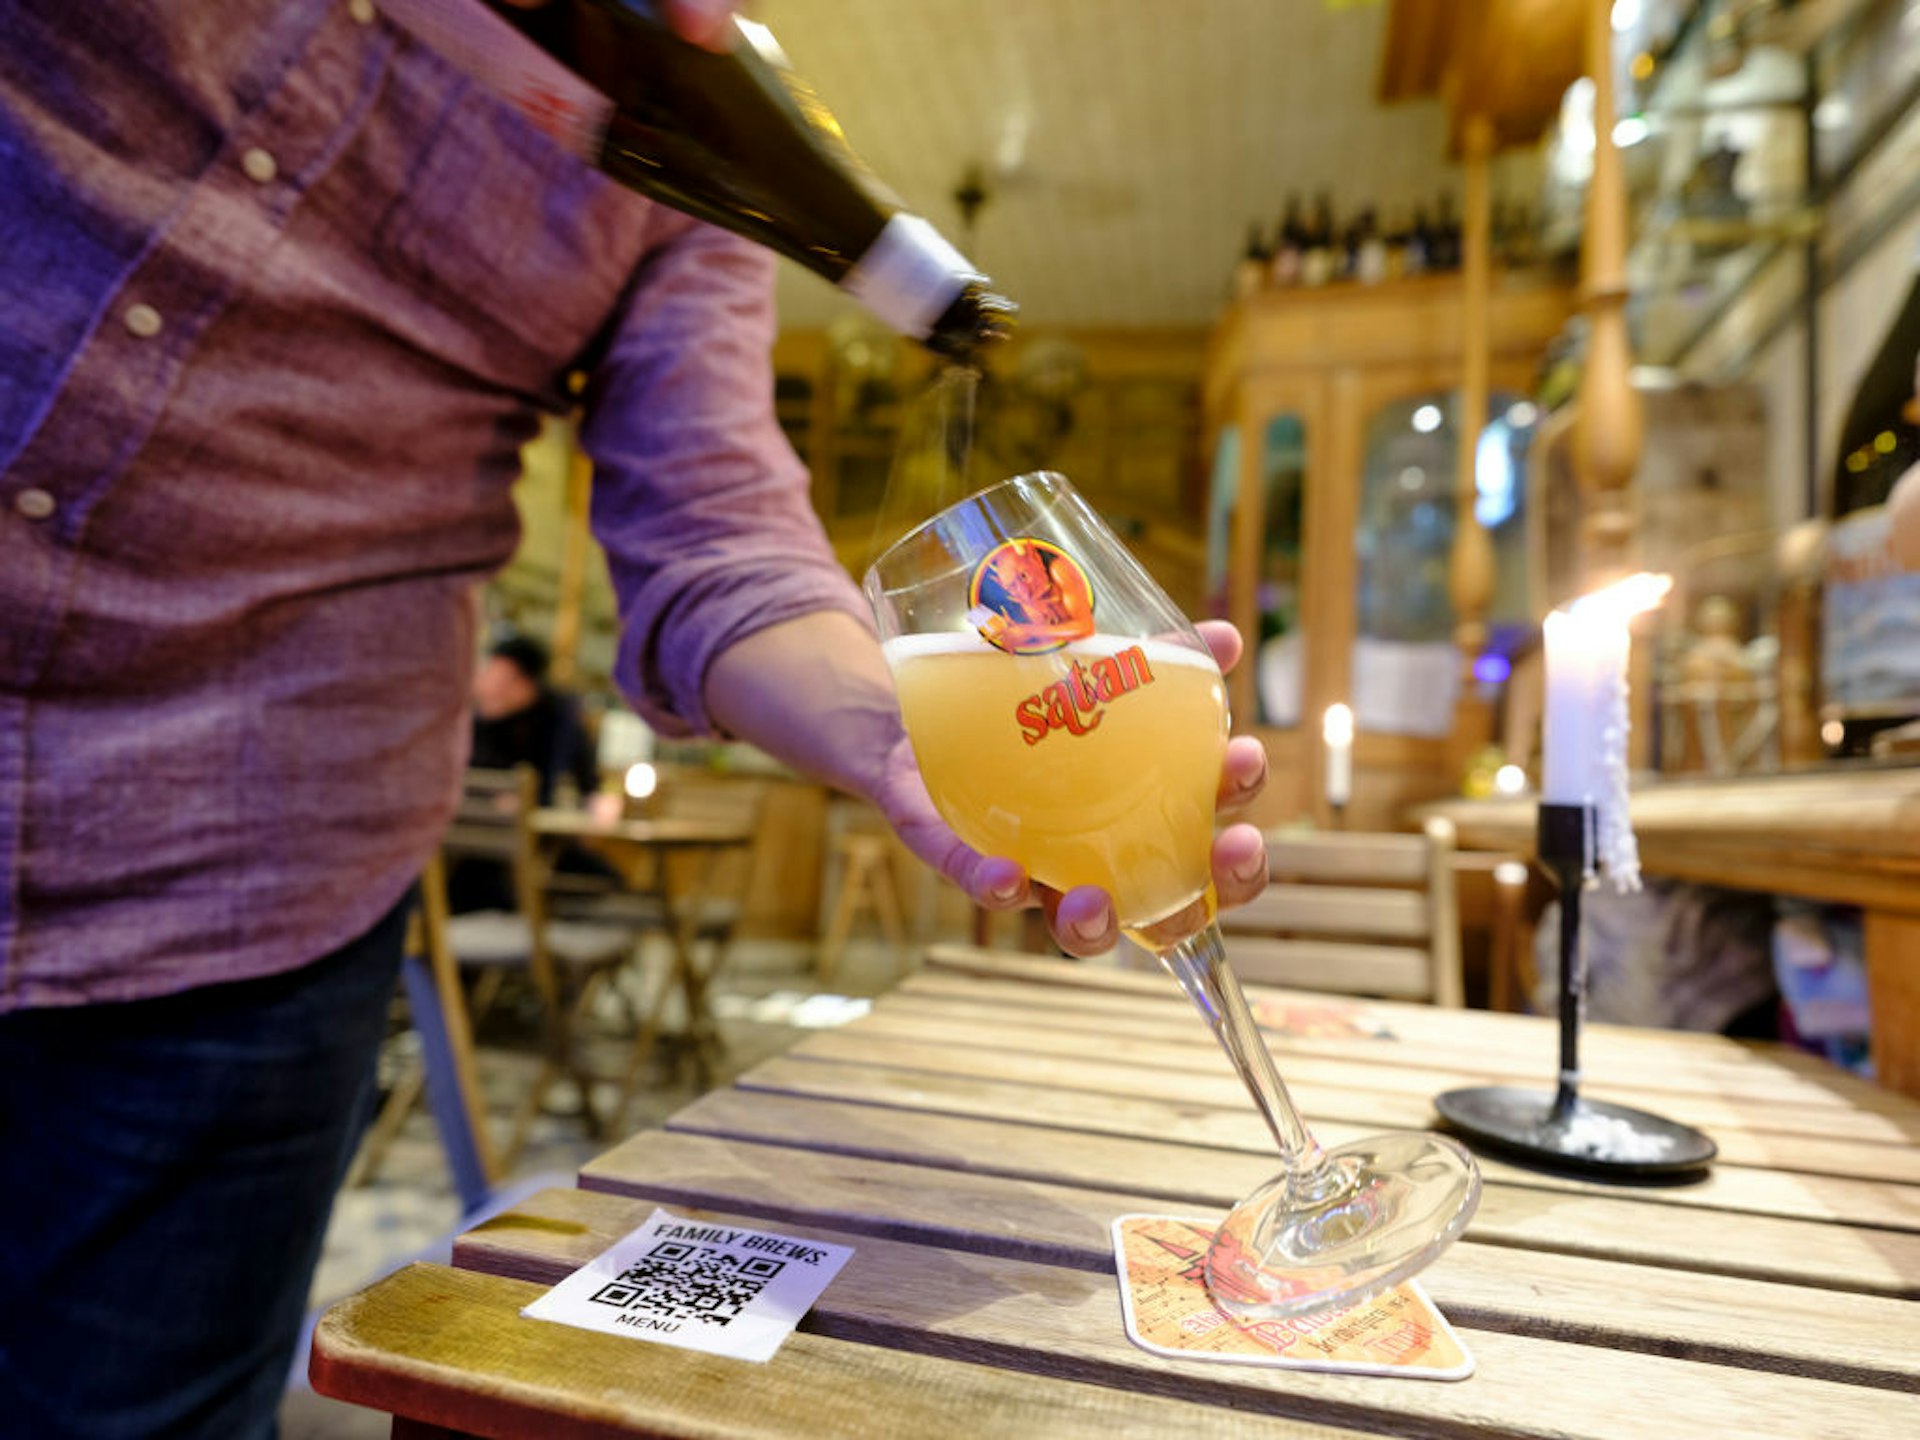 A red topped waiter serves a Satan white beer from the 'De Block' breewery in the pub 'Family Brews' in the Rue des Harengs in Brussels, Belgium.